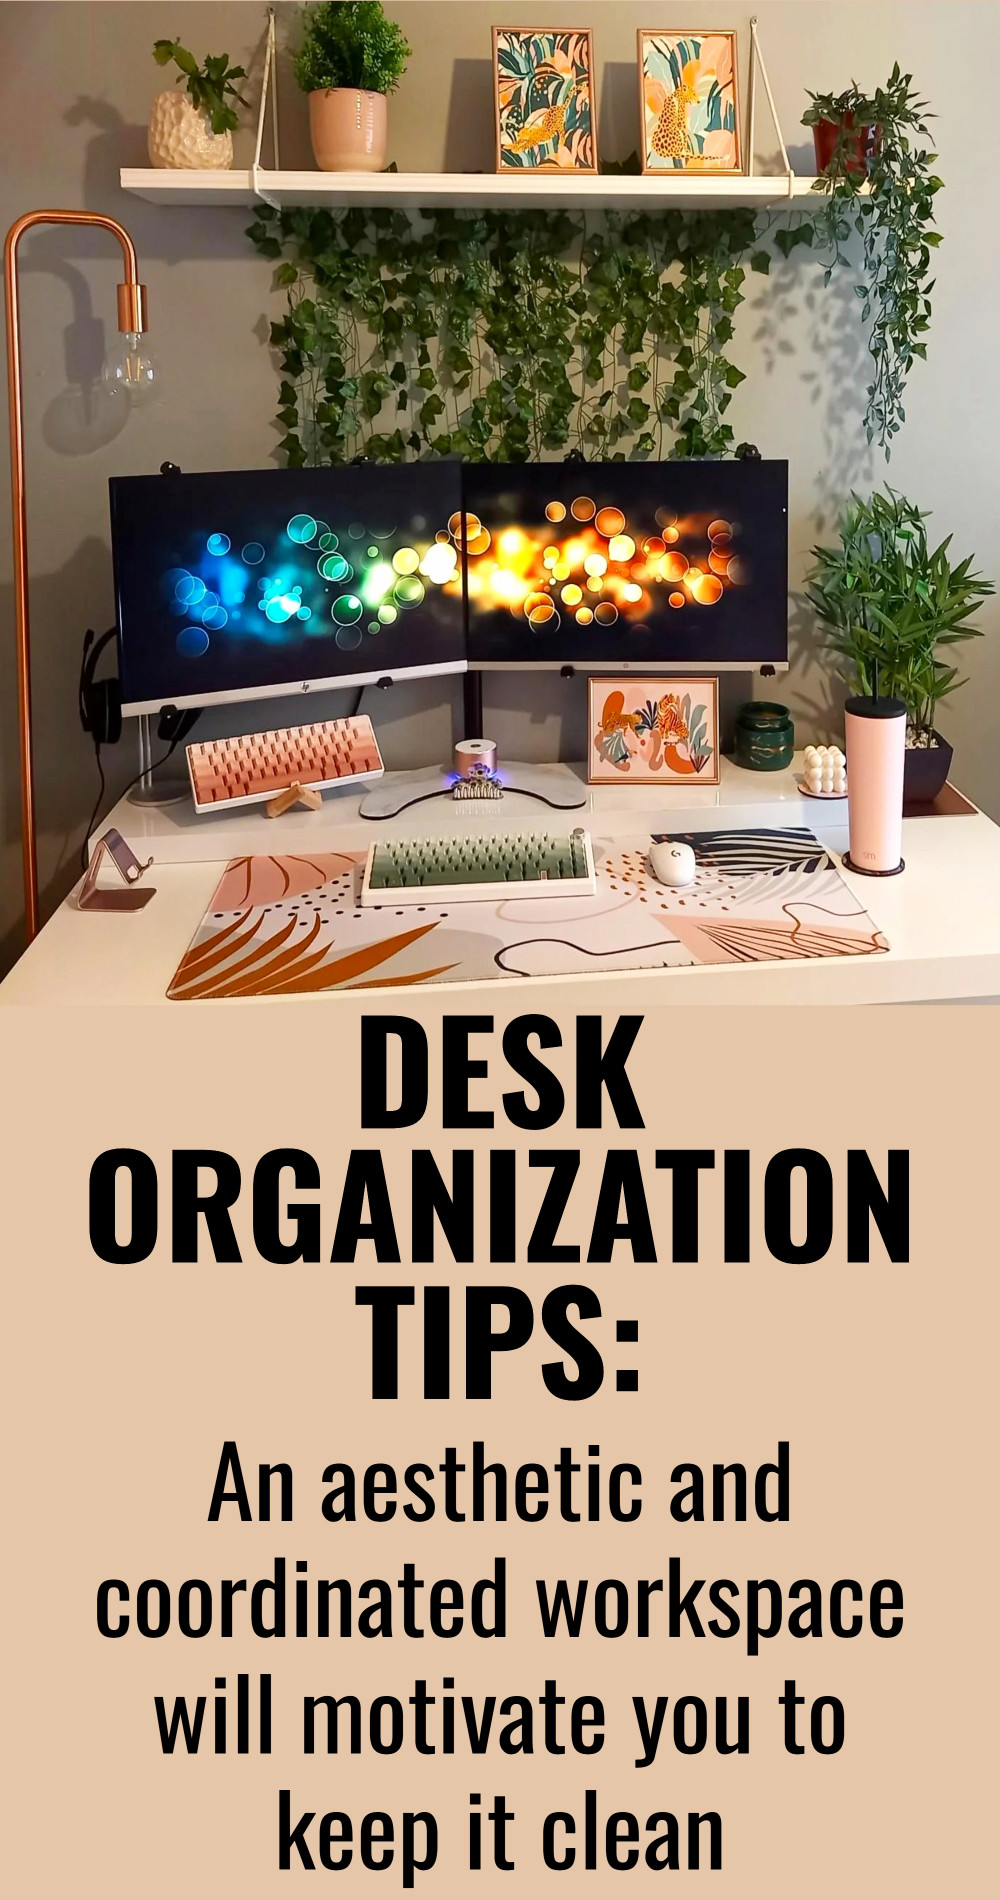 Home Office Organization Ideas For A Small Desk Workspace Area